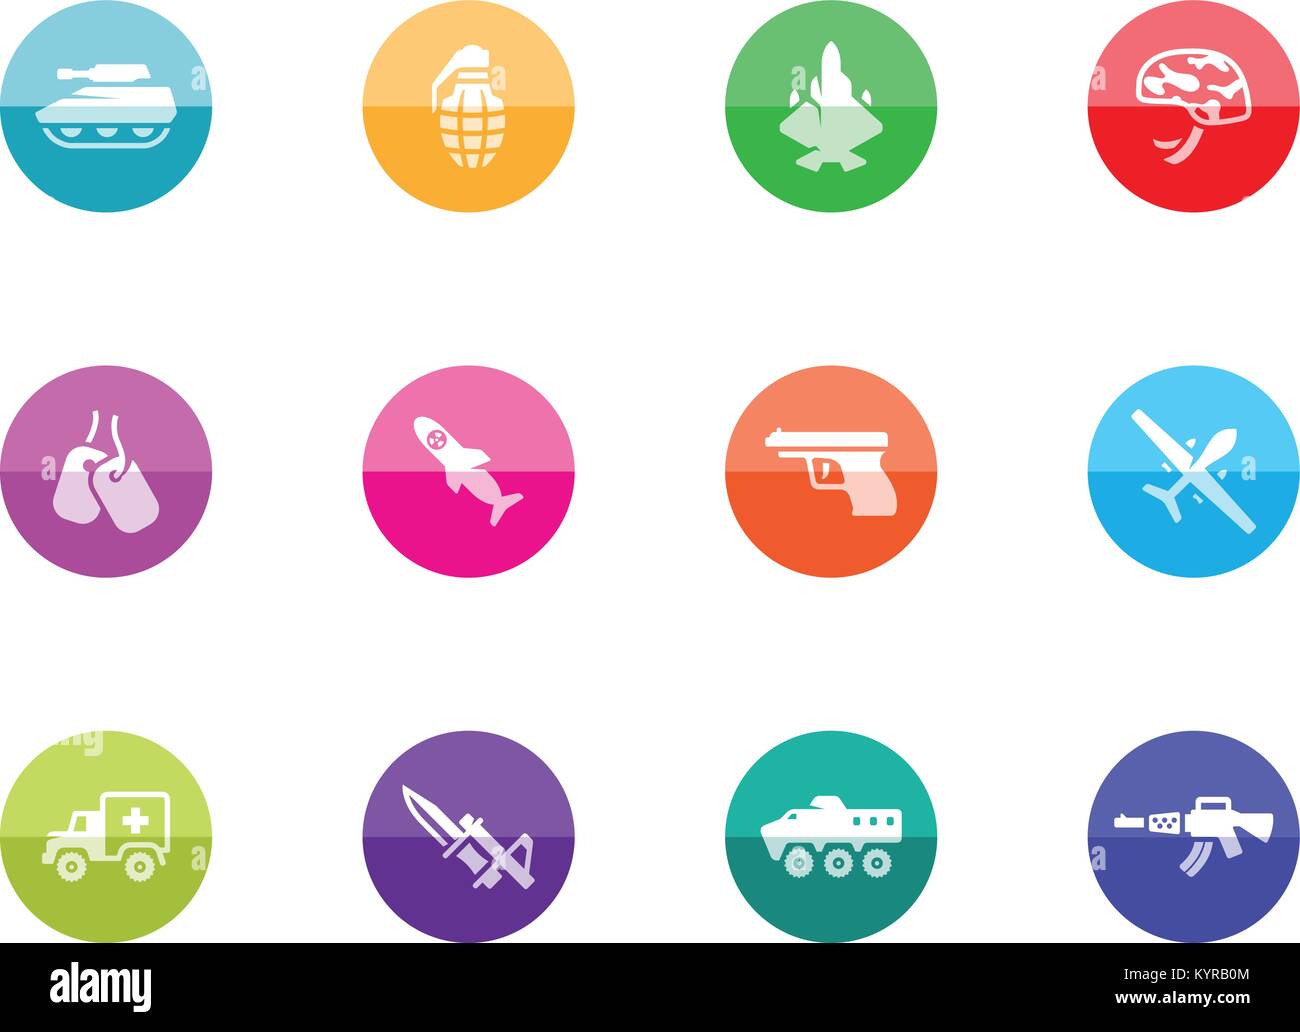 Military icons in color circles. Vector illustration. Stock Vector